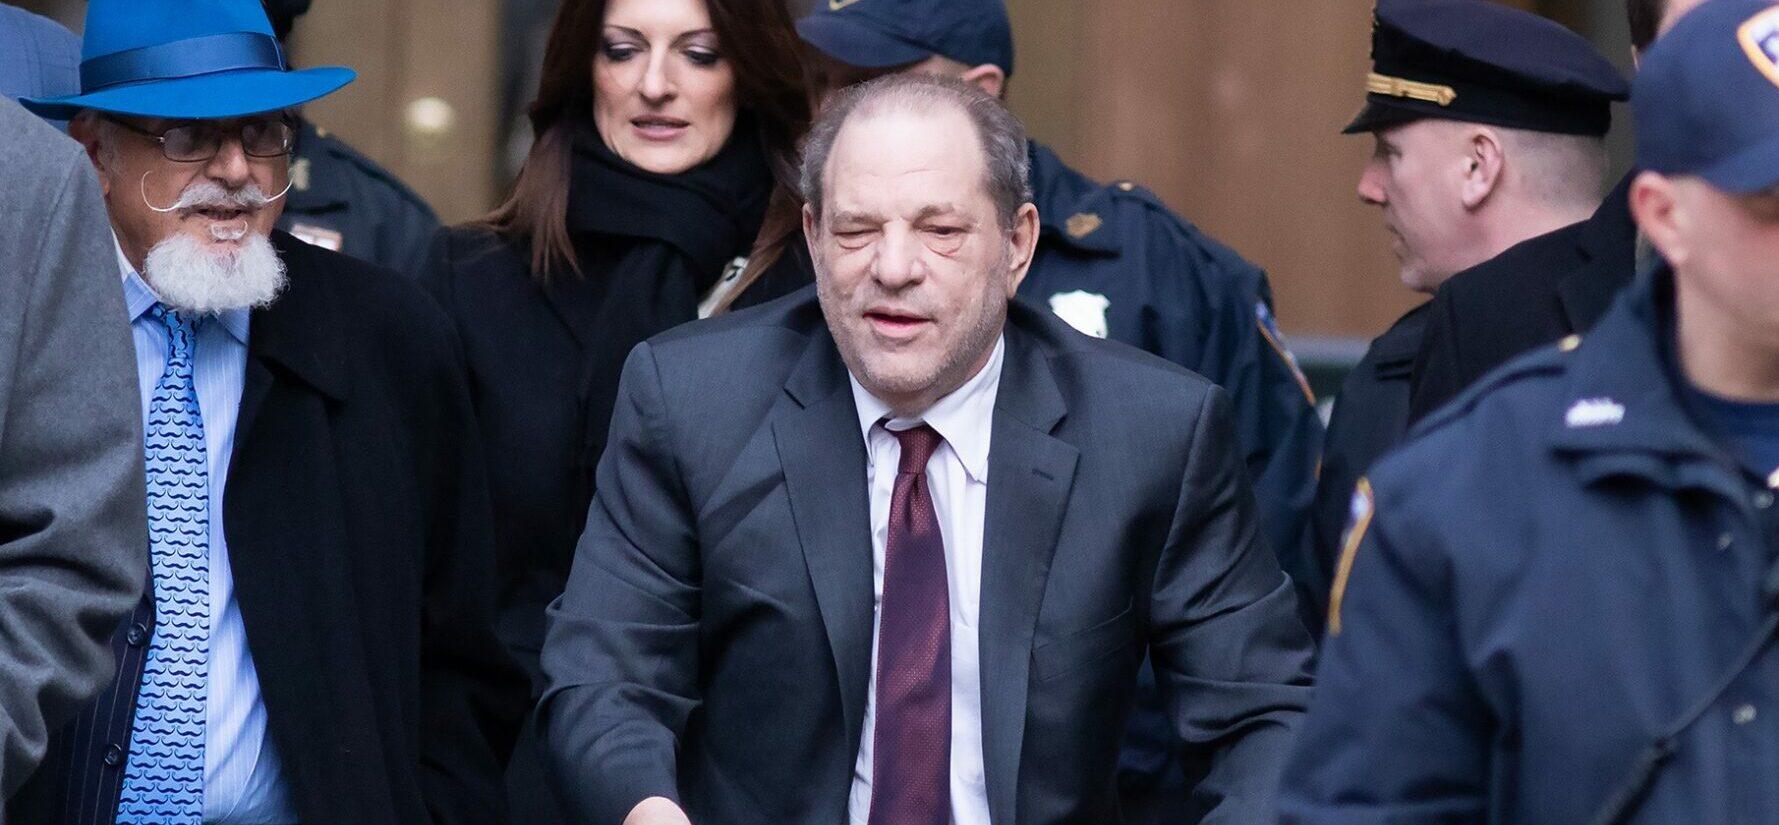 No Lawyers Want To Represent Harvey Weinstein for Remainder of Legal Woes